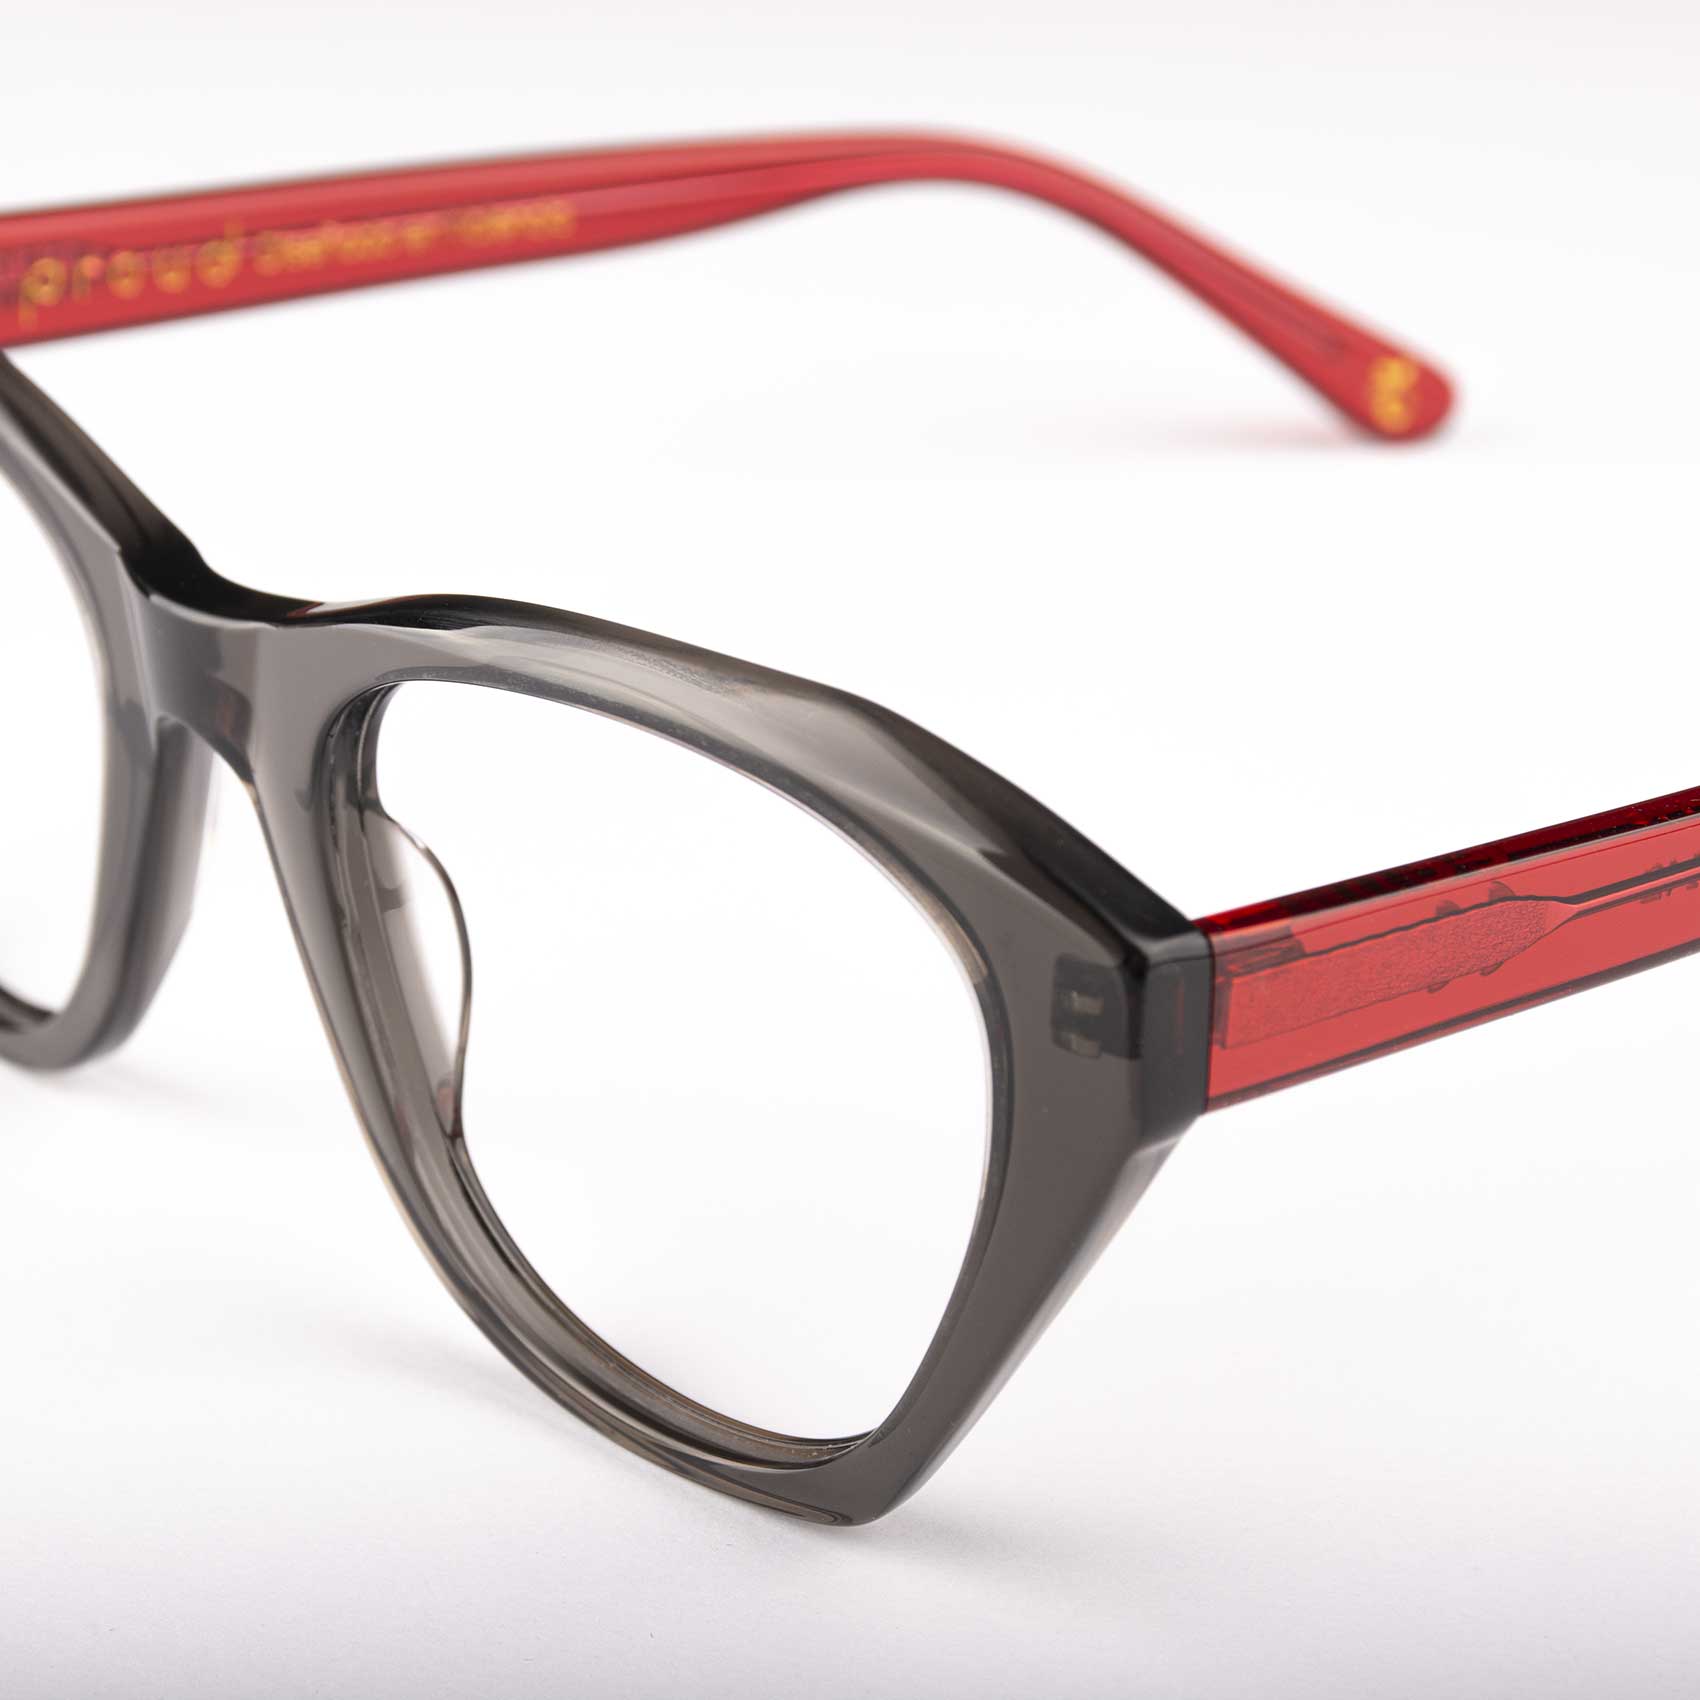 Proud Eyewear Son Bou grey and red Son Bou eco-design glasses frame detail